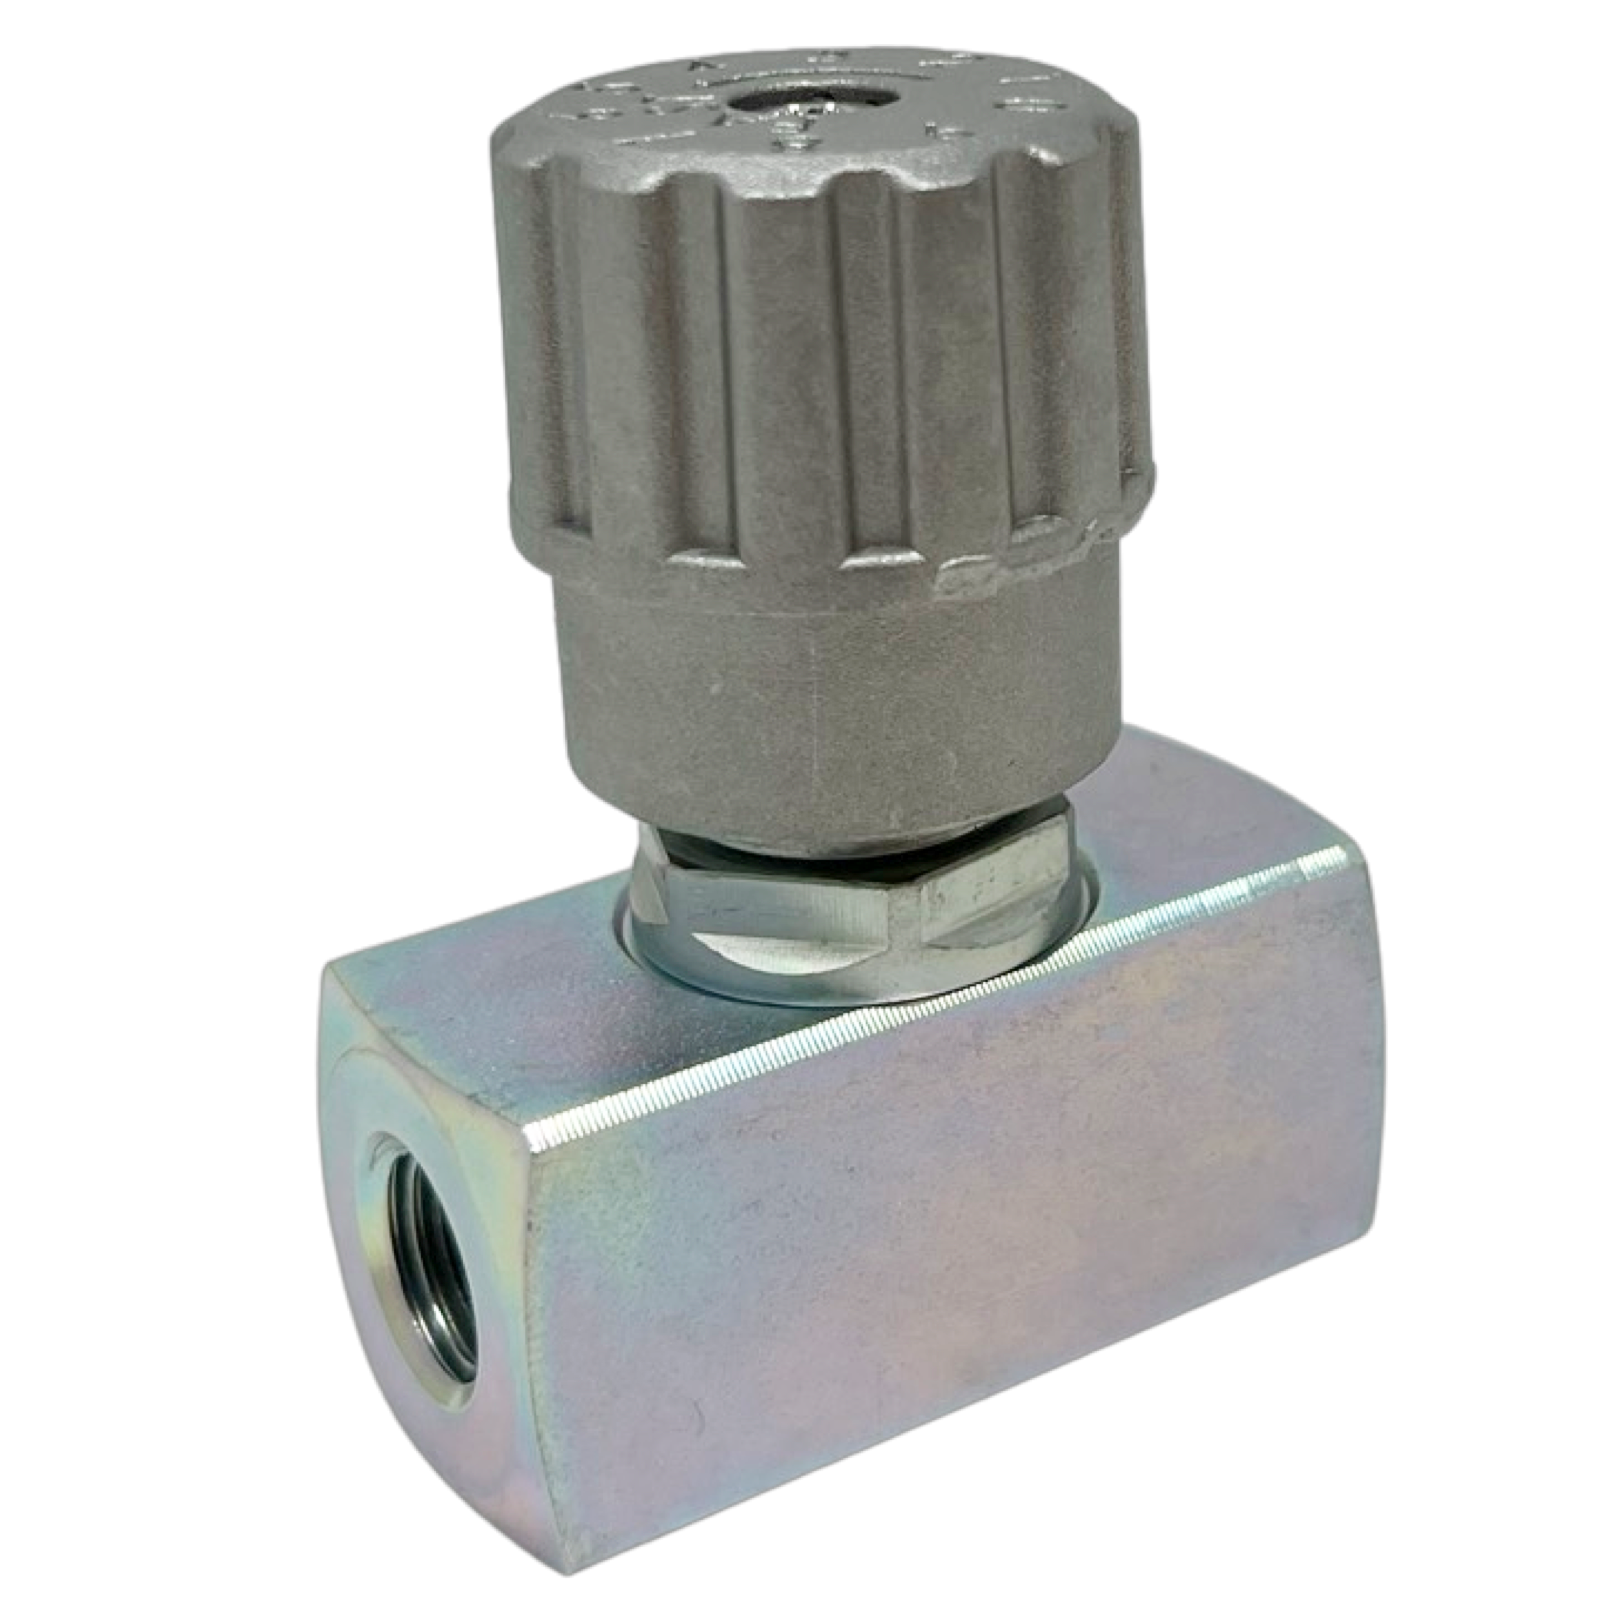 NN1/4-1 : AFP Needle Valve, 1/4" NPT, 5700psi and 4GPM Flow Rated, Steel